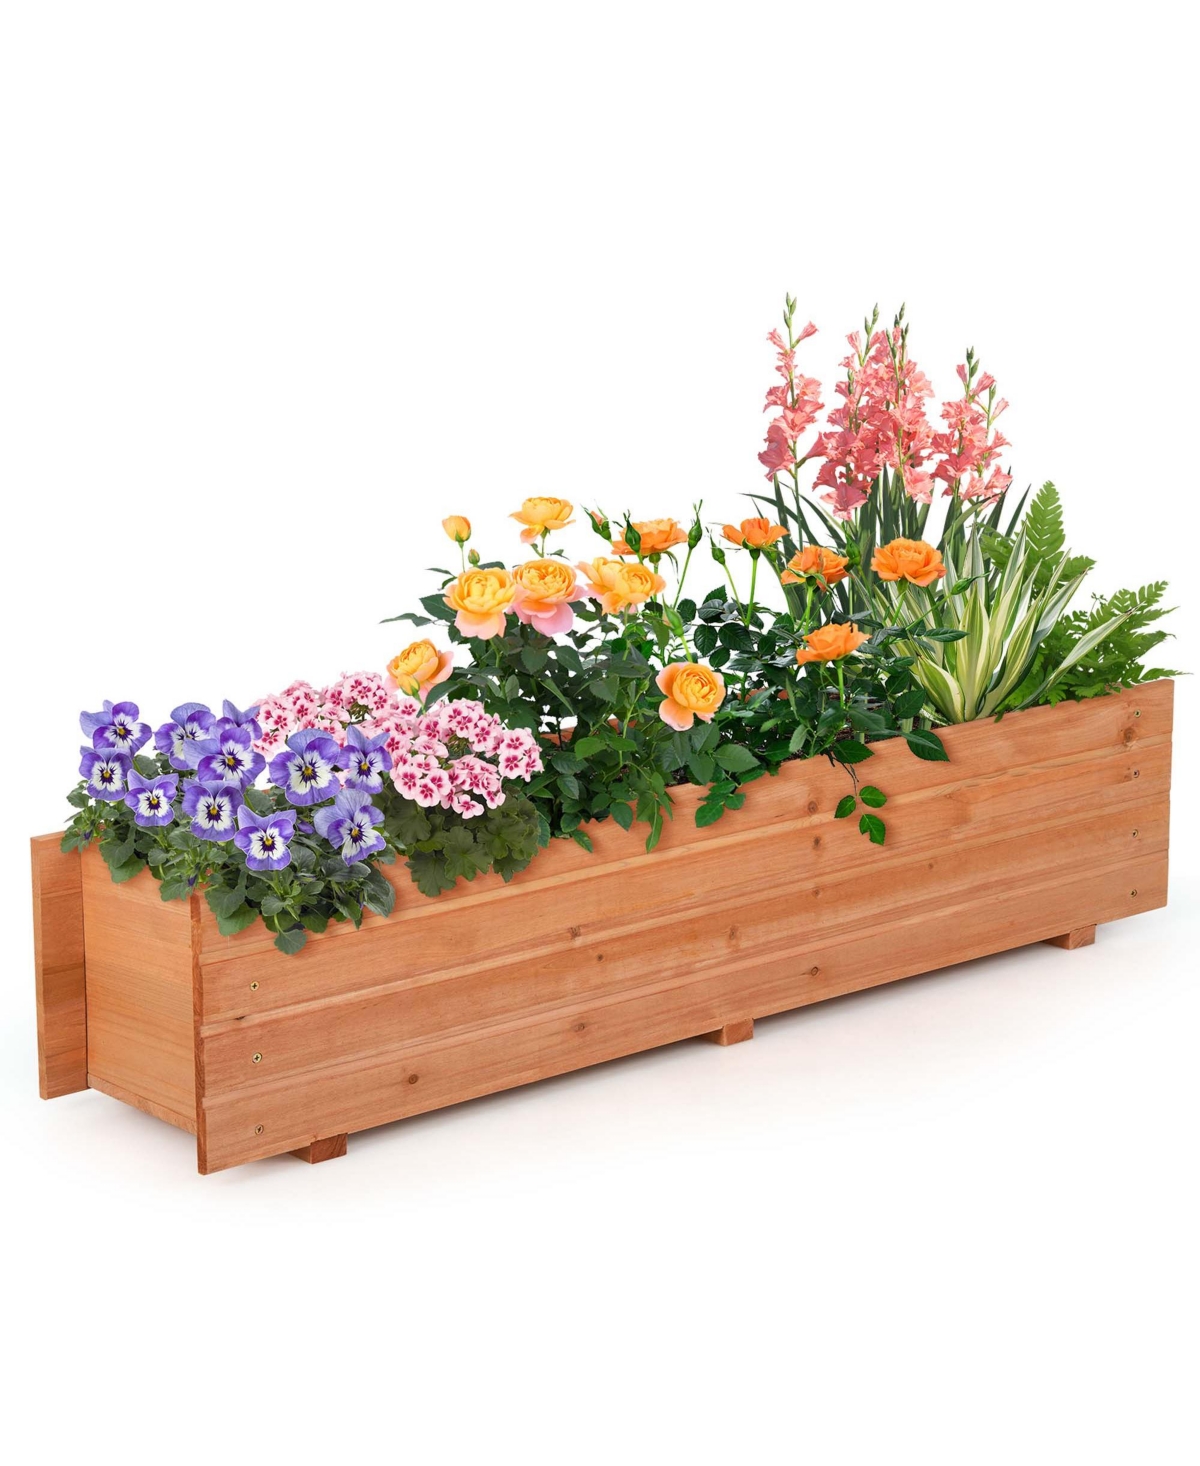 Raised Garden Bed Wood Rectangular Planter Box with 2 Drainage Holes - Natural